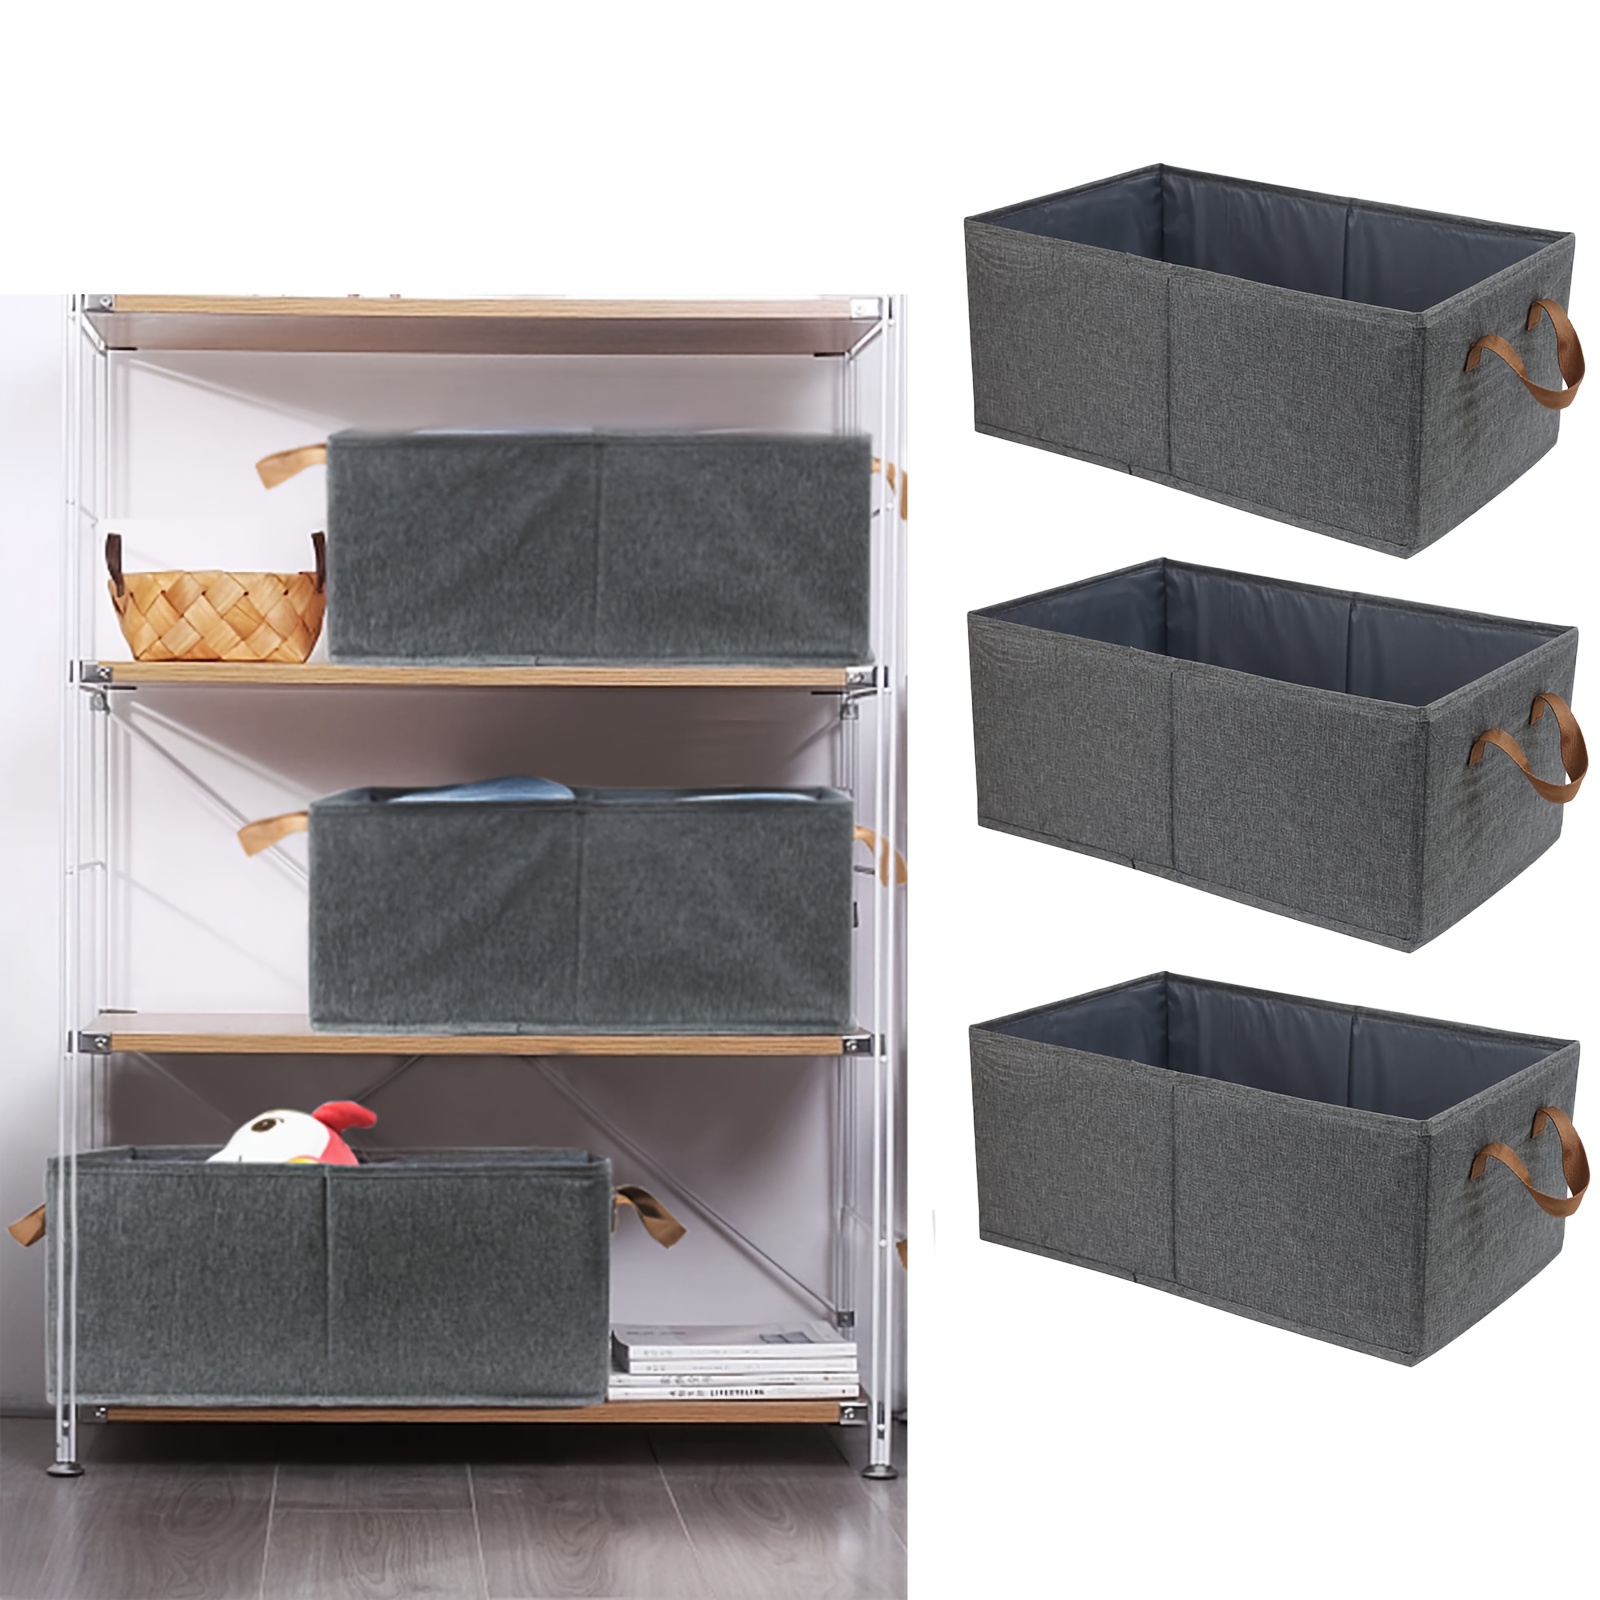 EASEVE Closet Organizers and Storage Bins for Clothes - 12 Cell